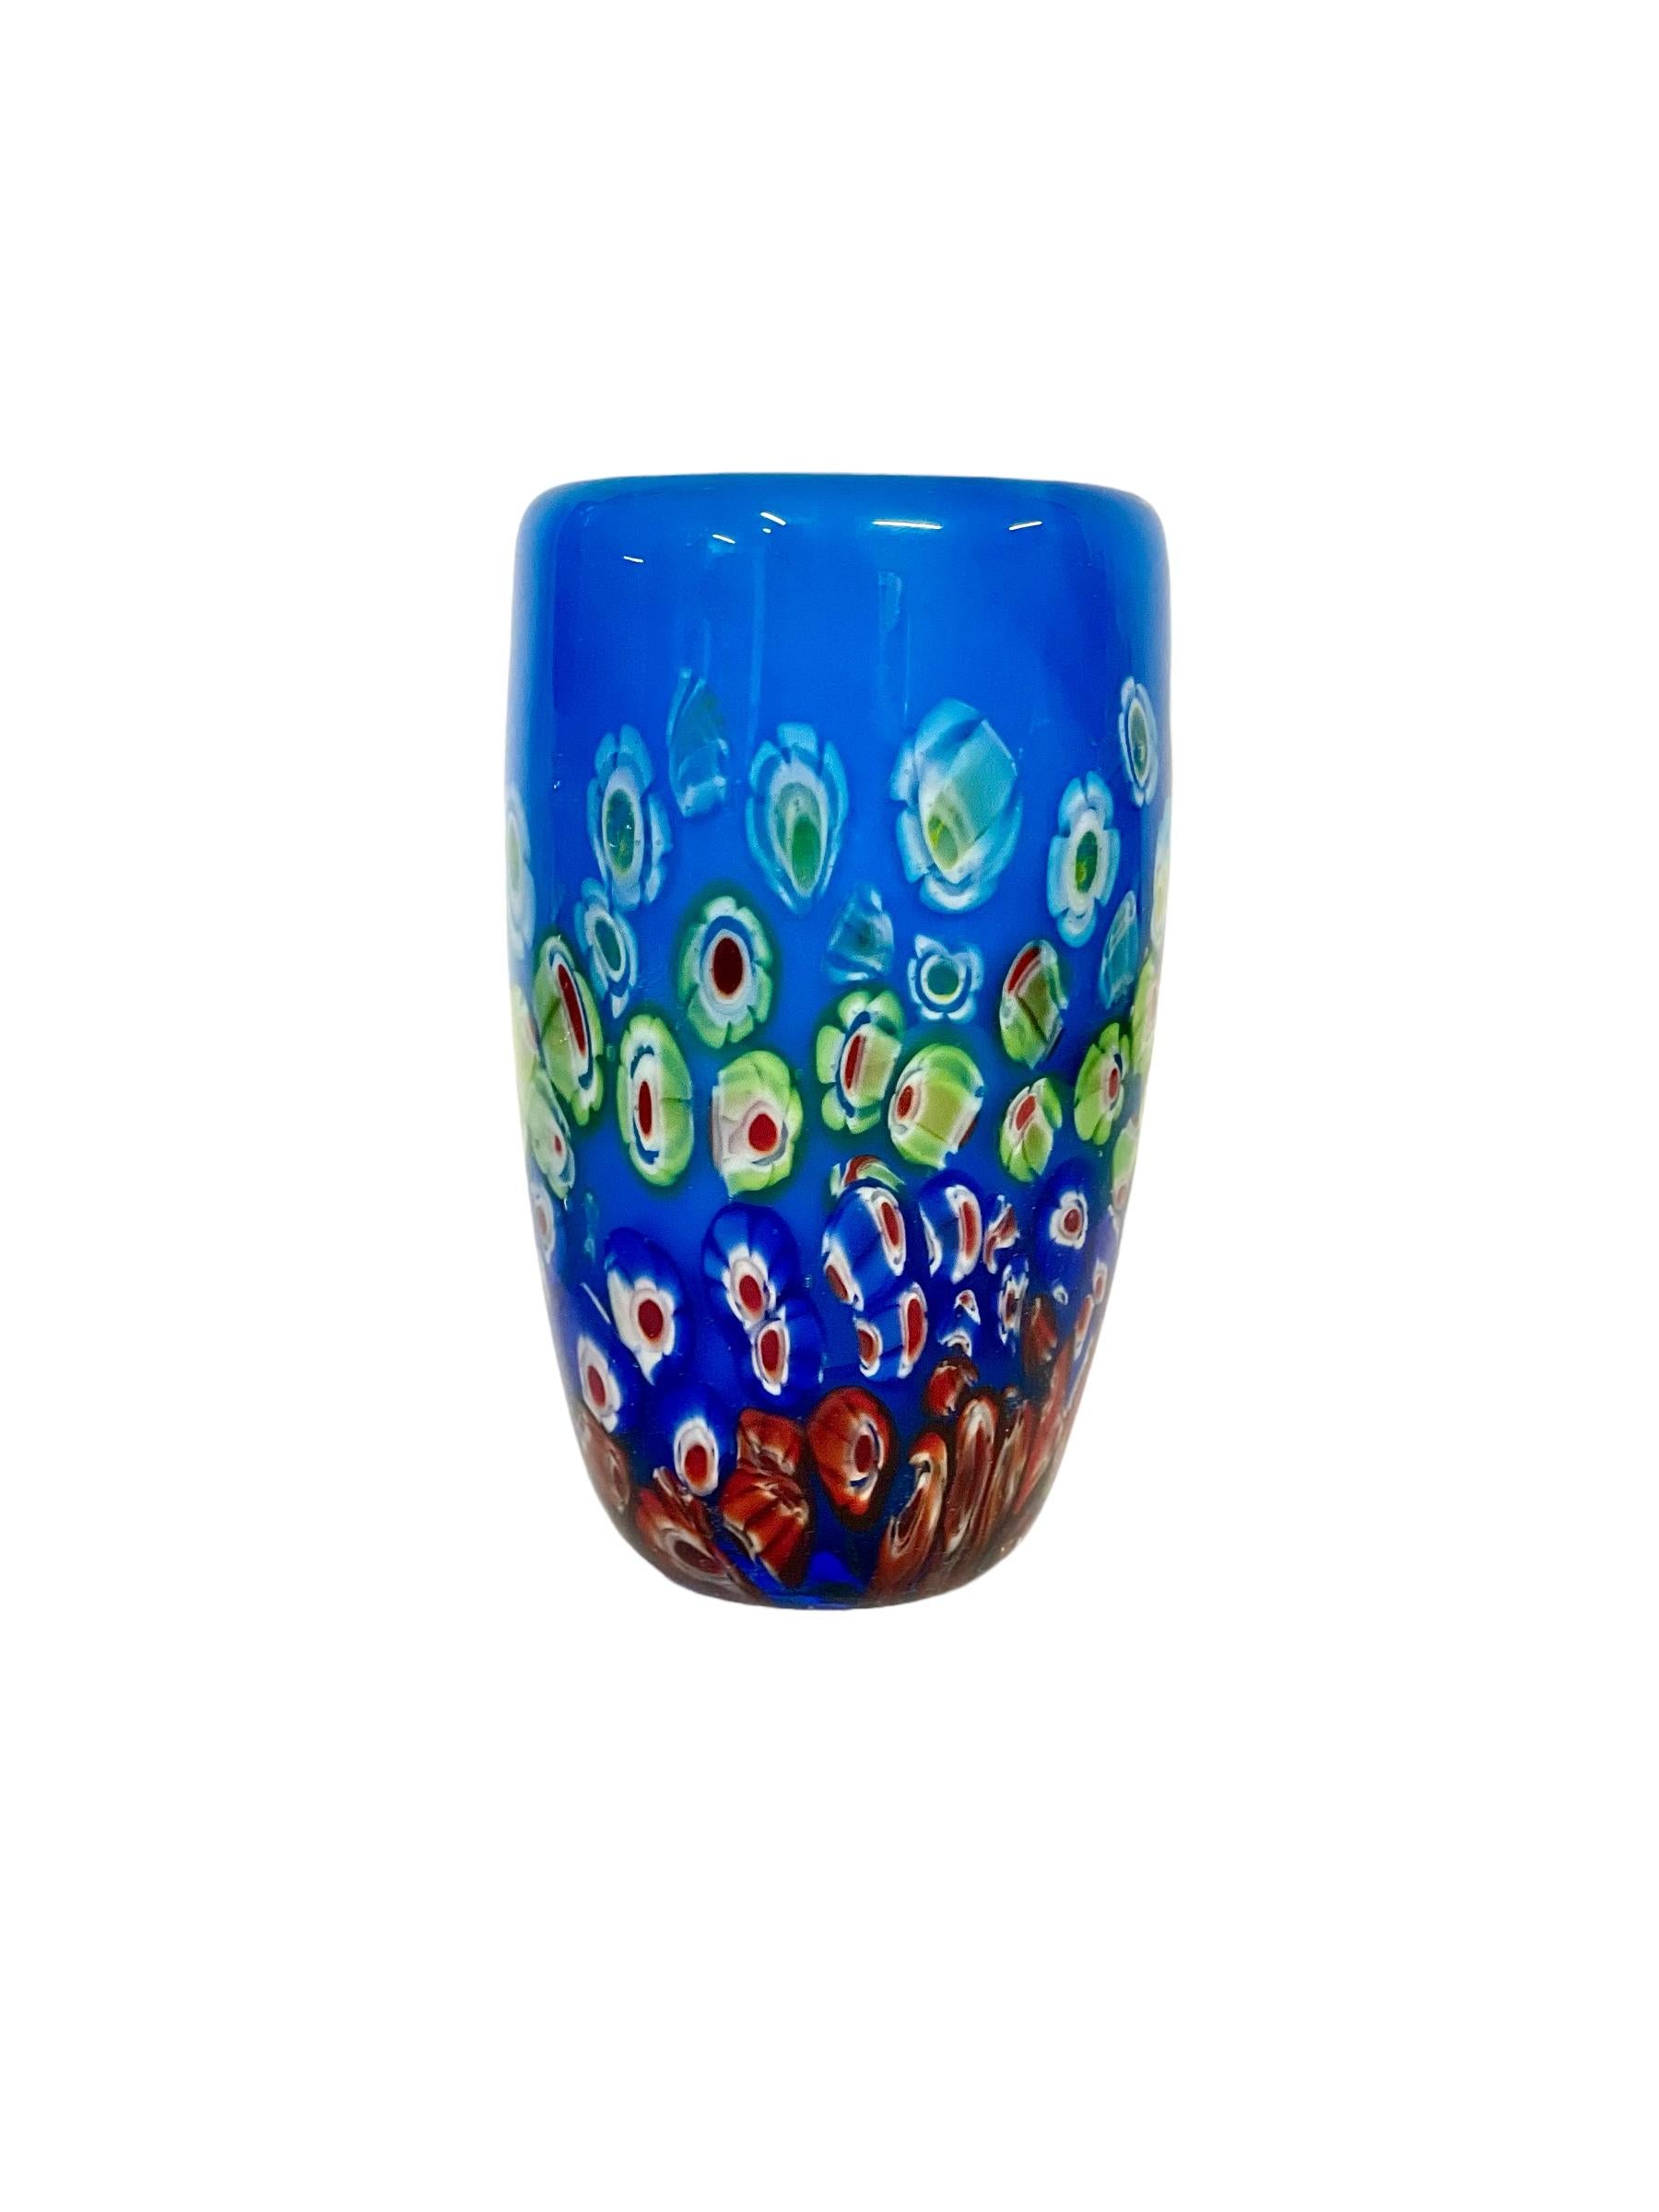 A beautiful Murano blown glass 'Millefiori' vase in deepest sky blue, with a decoration reminiscent of sliced sweets. This gorgeous effect has been created by the use of 'murrine', which is an Italian term for coloured patterns or images made in